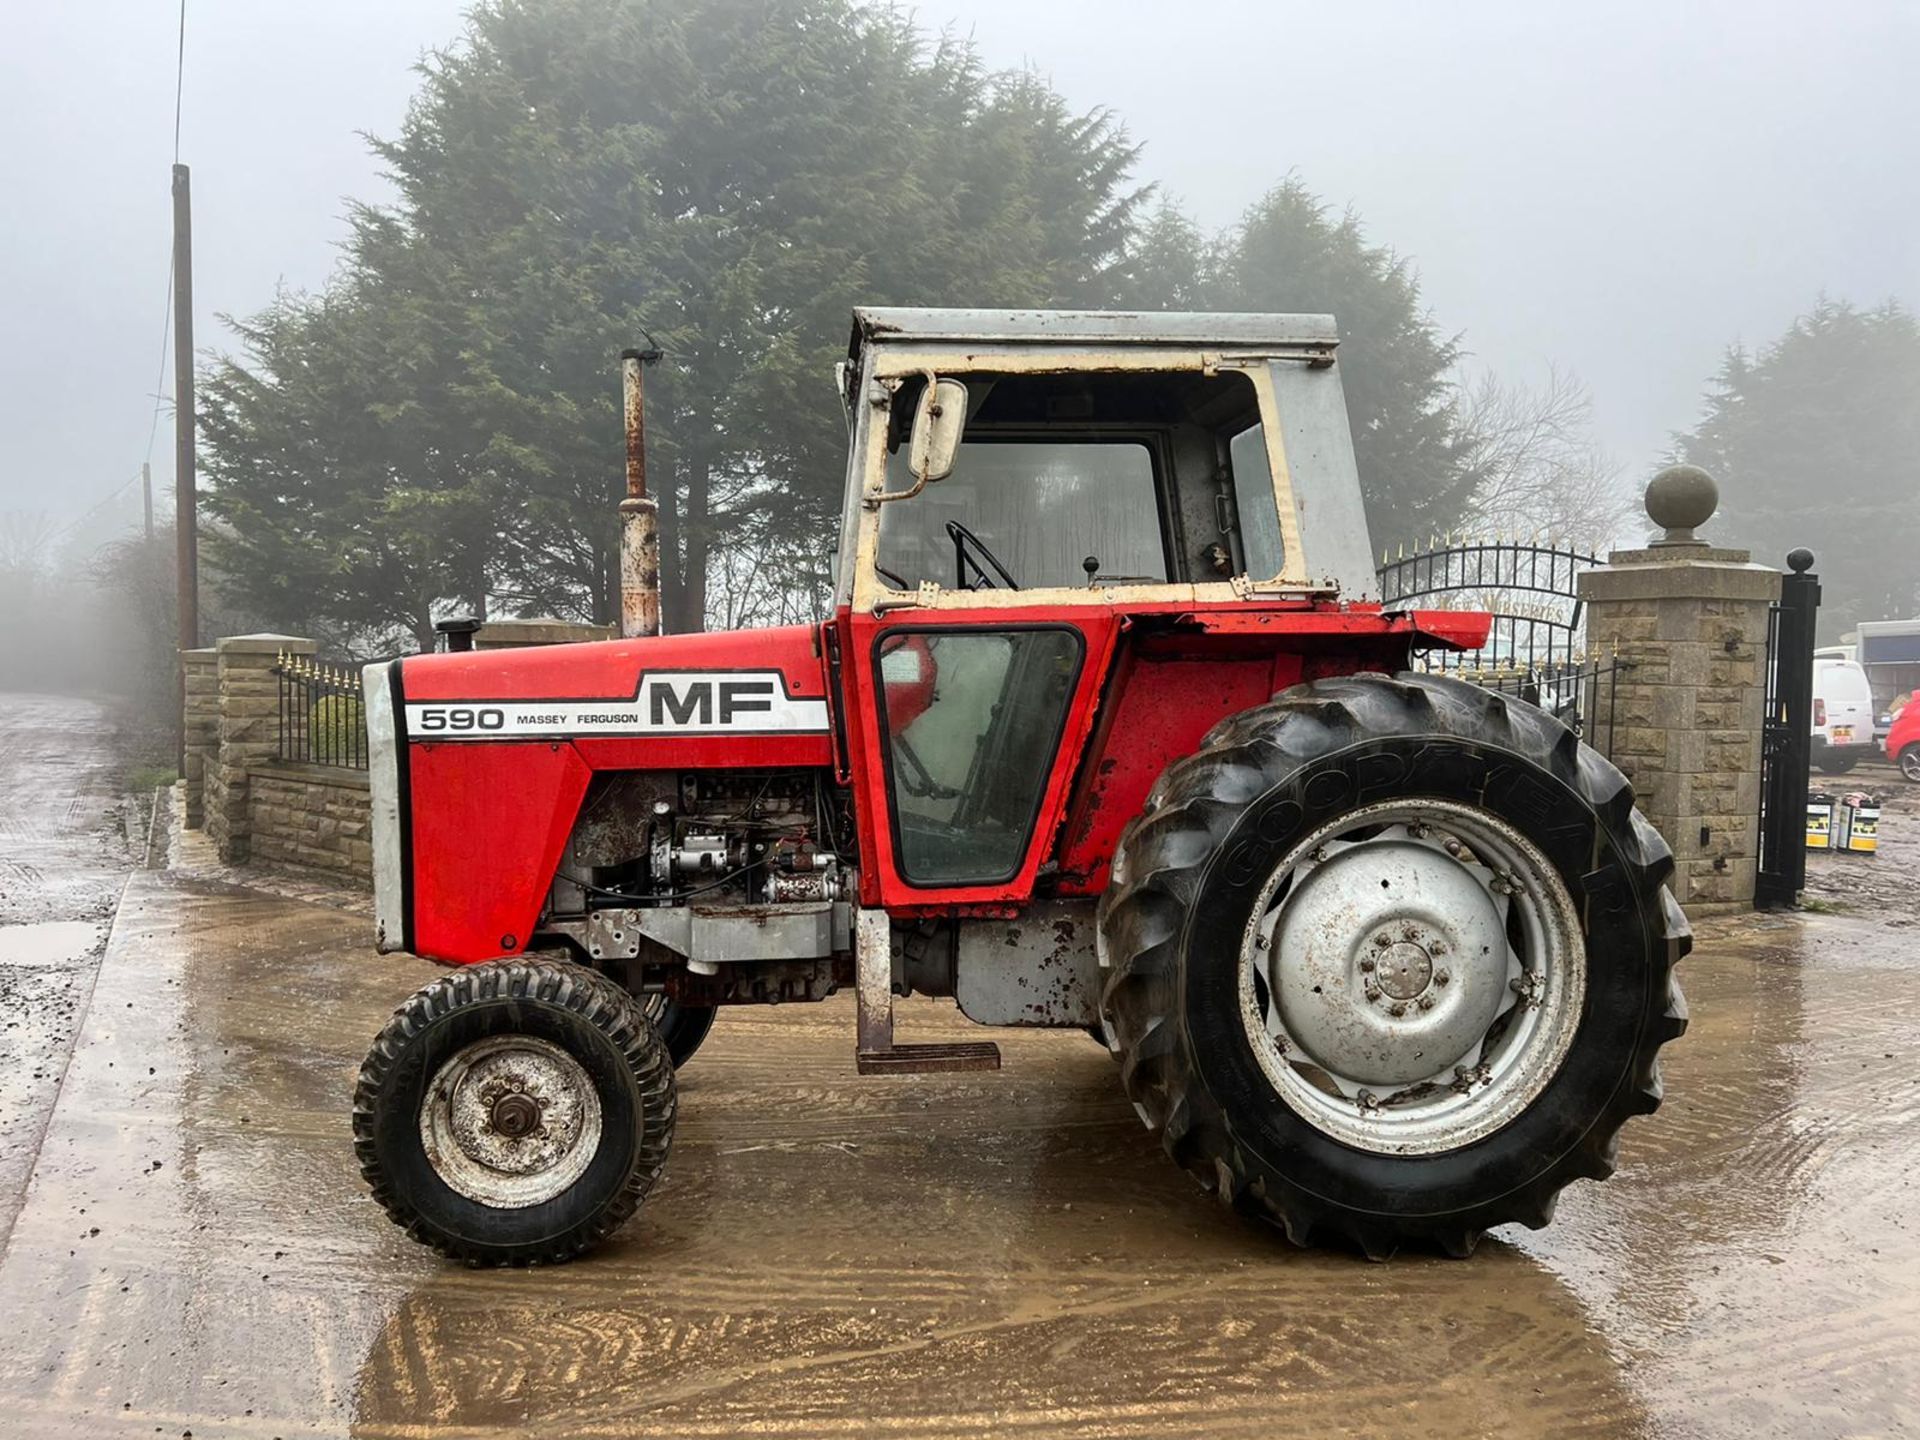 MASSEY FERGUSON 590 75hp TRACTOR, RUNS AND DRIVES, ROAD REGISTERED, CABBED, 2 SPOOLS